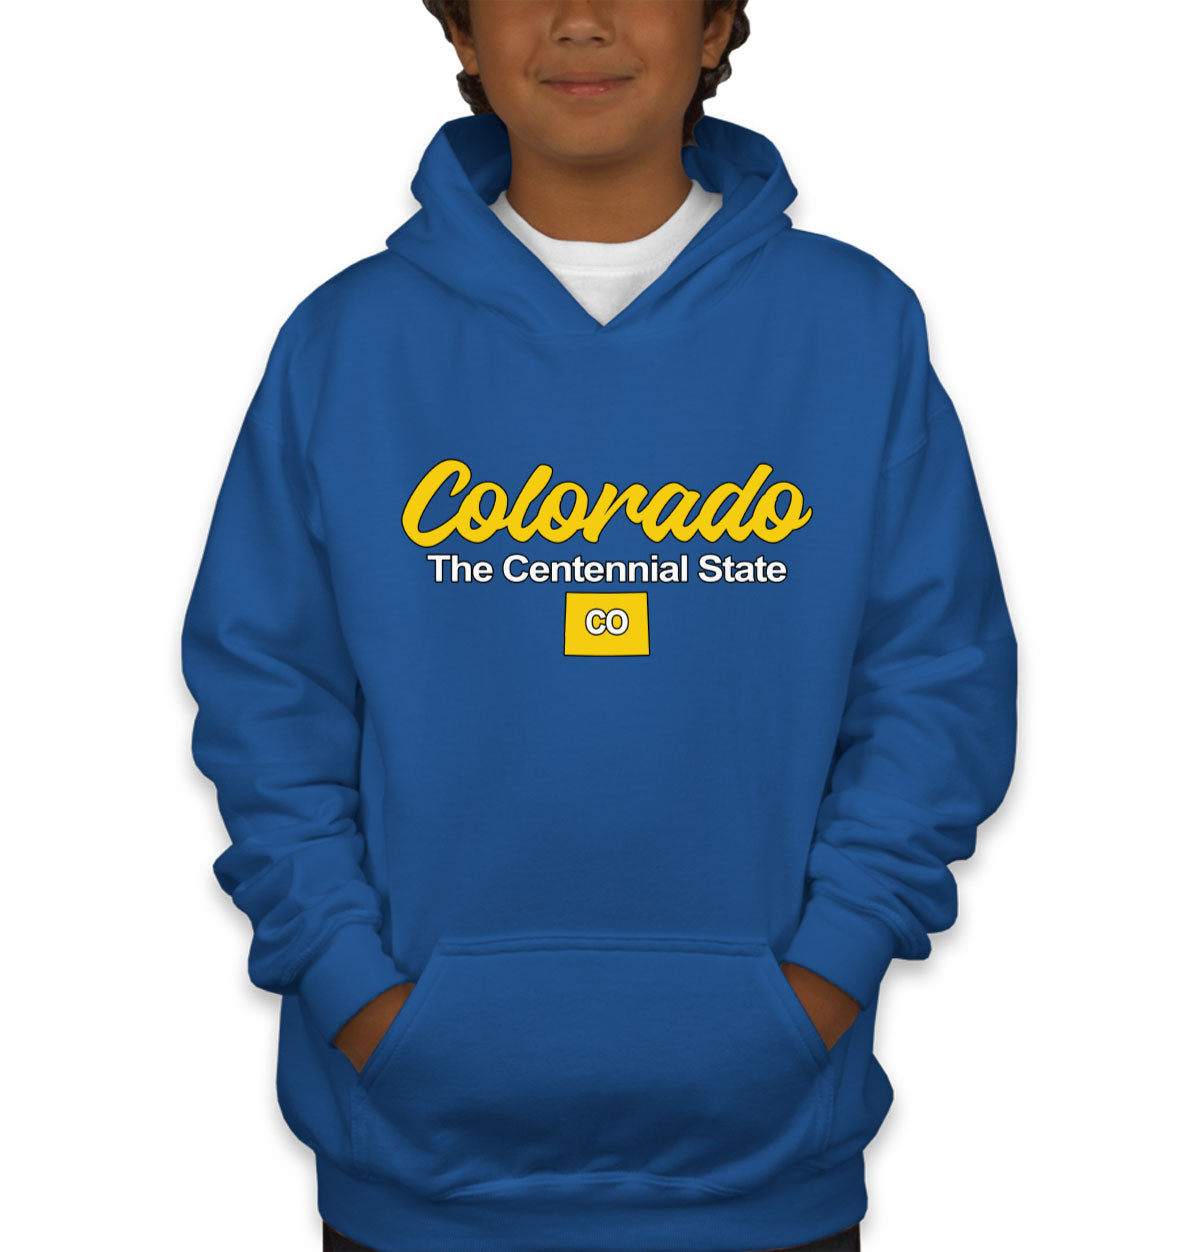 Colorado The Centennial State Youth Hoodie